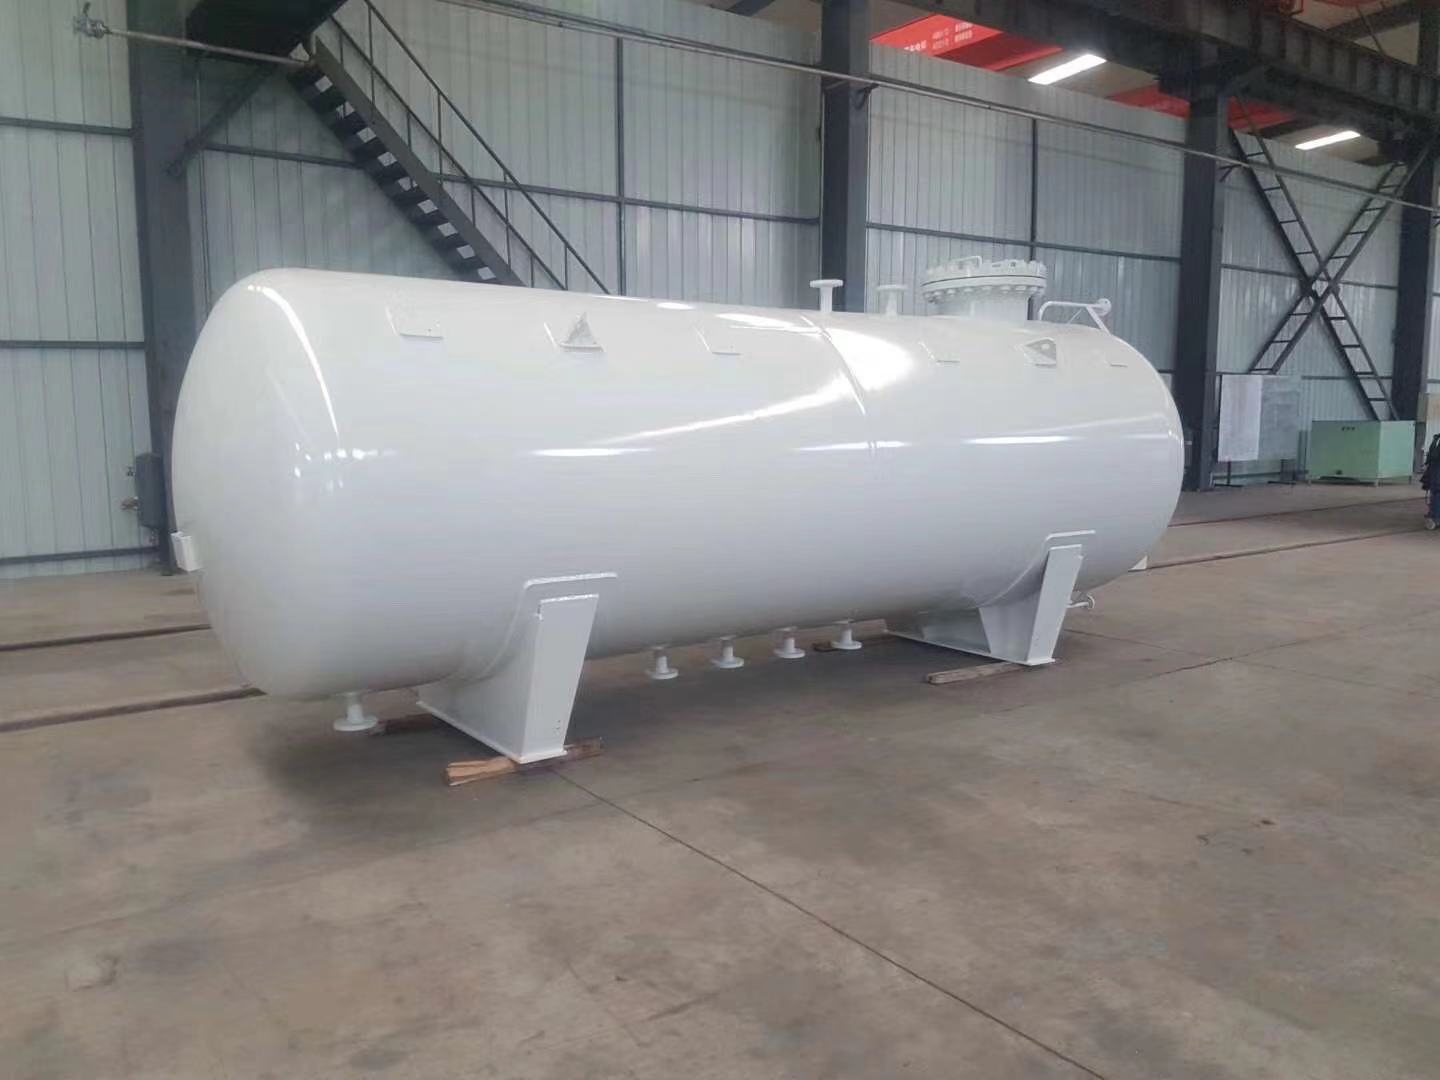 Specifications for design of liquefied gas storage tanks Material selection for liquefied gas storage tanks